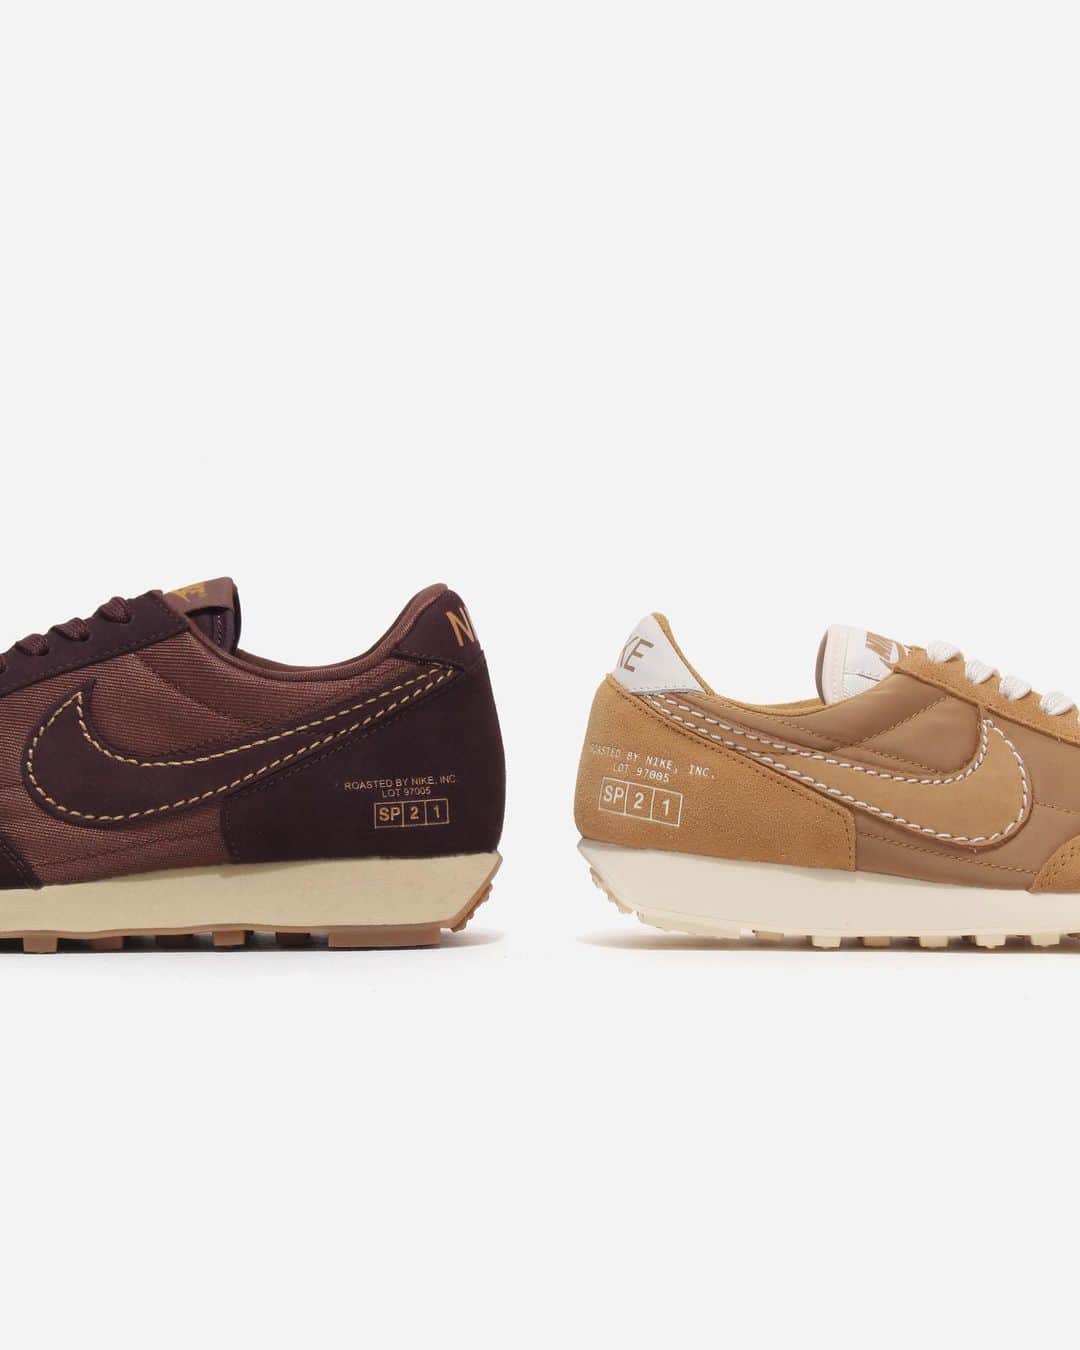 A+Sのインスタグラム：「2021. 2. 1 (mon) in store  ■ NIKE DBREAK COLOR : WHEAT/MAHOGANY SIZE : 26.0cm - 29.0cm, 30.0cm PRICE : ¥12,000 (+TAX)  ■ NIKE WMNS DBREAK COLOR : WHEAT/PALE IVORY SIZE : 22.0cm - 25.0cm PRICE : ¥12,000 (+TAX)  カフェカルチャーののんびりとした雰囲気からインスピレーションを得て作られたカフェラテパック。モカの様な豊かで落ち着きのあるカラーになります。ワイズもすっきりと大人な雰囲気がありボトムスを選ばない優れた一足です。  A cafe latte pack inspired by the laid-back atmosphere of cafe culture. It will be a rich and calm color like mocha. Wise is also a neat and mature atmosphere, and it is an excellent pair that does not choose bottoms.  #a_and_s #NIKE #NIKEDBREAK #NIKEWMNSDBREAK #NIKECAFFELATTEPACK」